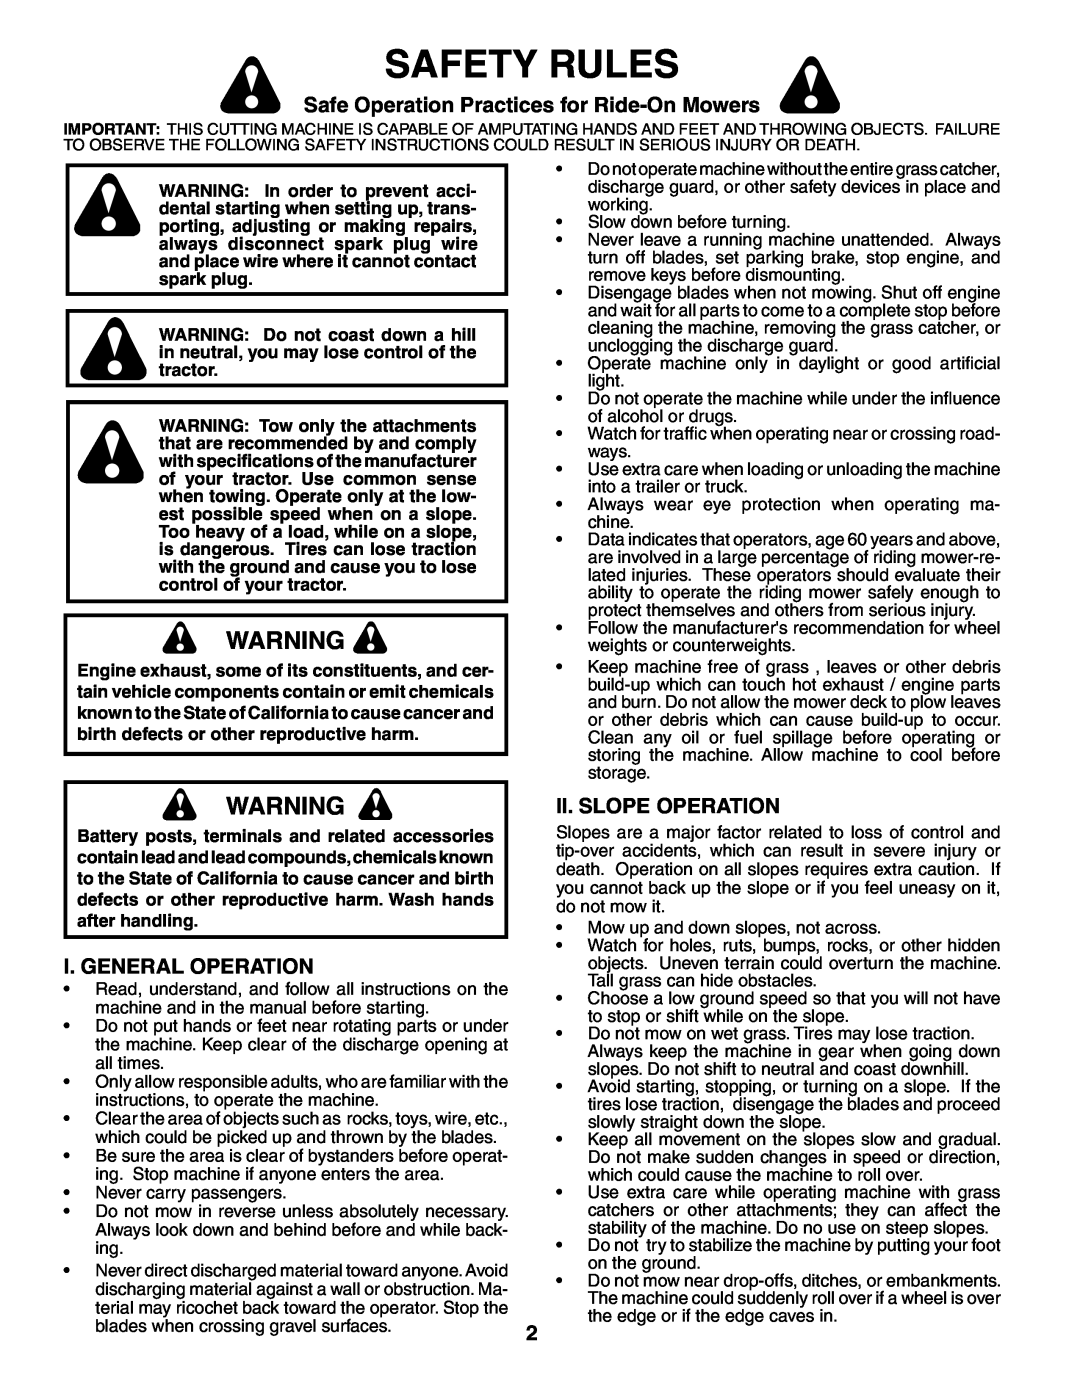 Poulan HD21H42 manual Safety Rules, Safe Operation Practices for Ride-On Mowers, I. General Operation, Ii. Slope Operation 